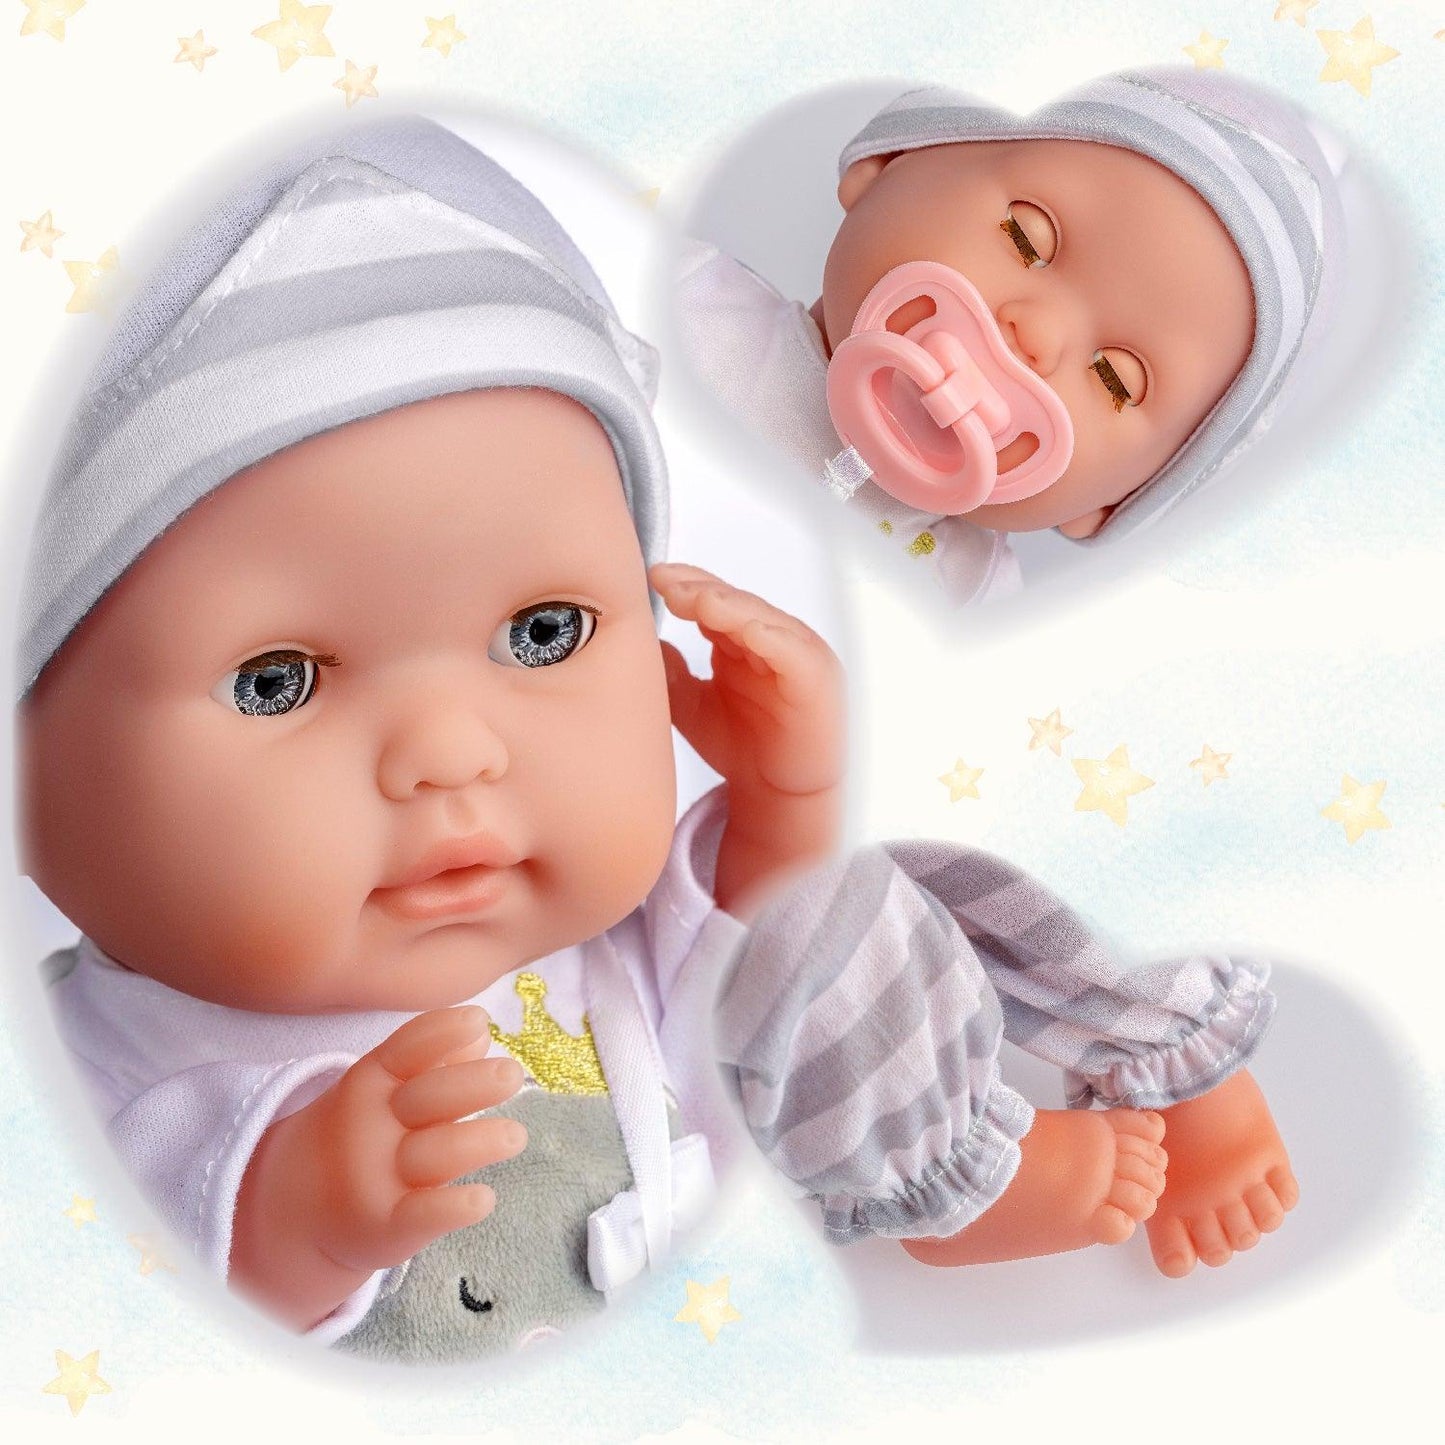 Berenguer Boutique 15" Soft Body Baby Doll Open/Close Eyes with Grey Outfit - JC Toys Group Inc.